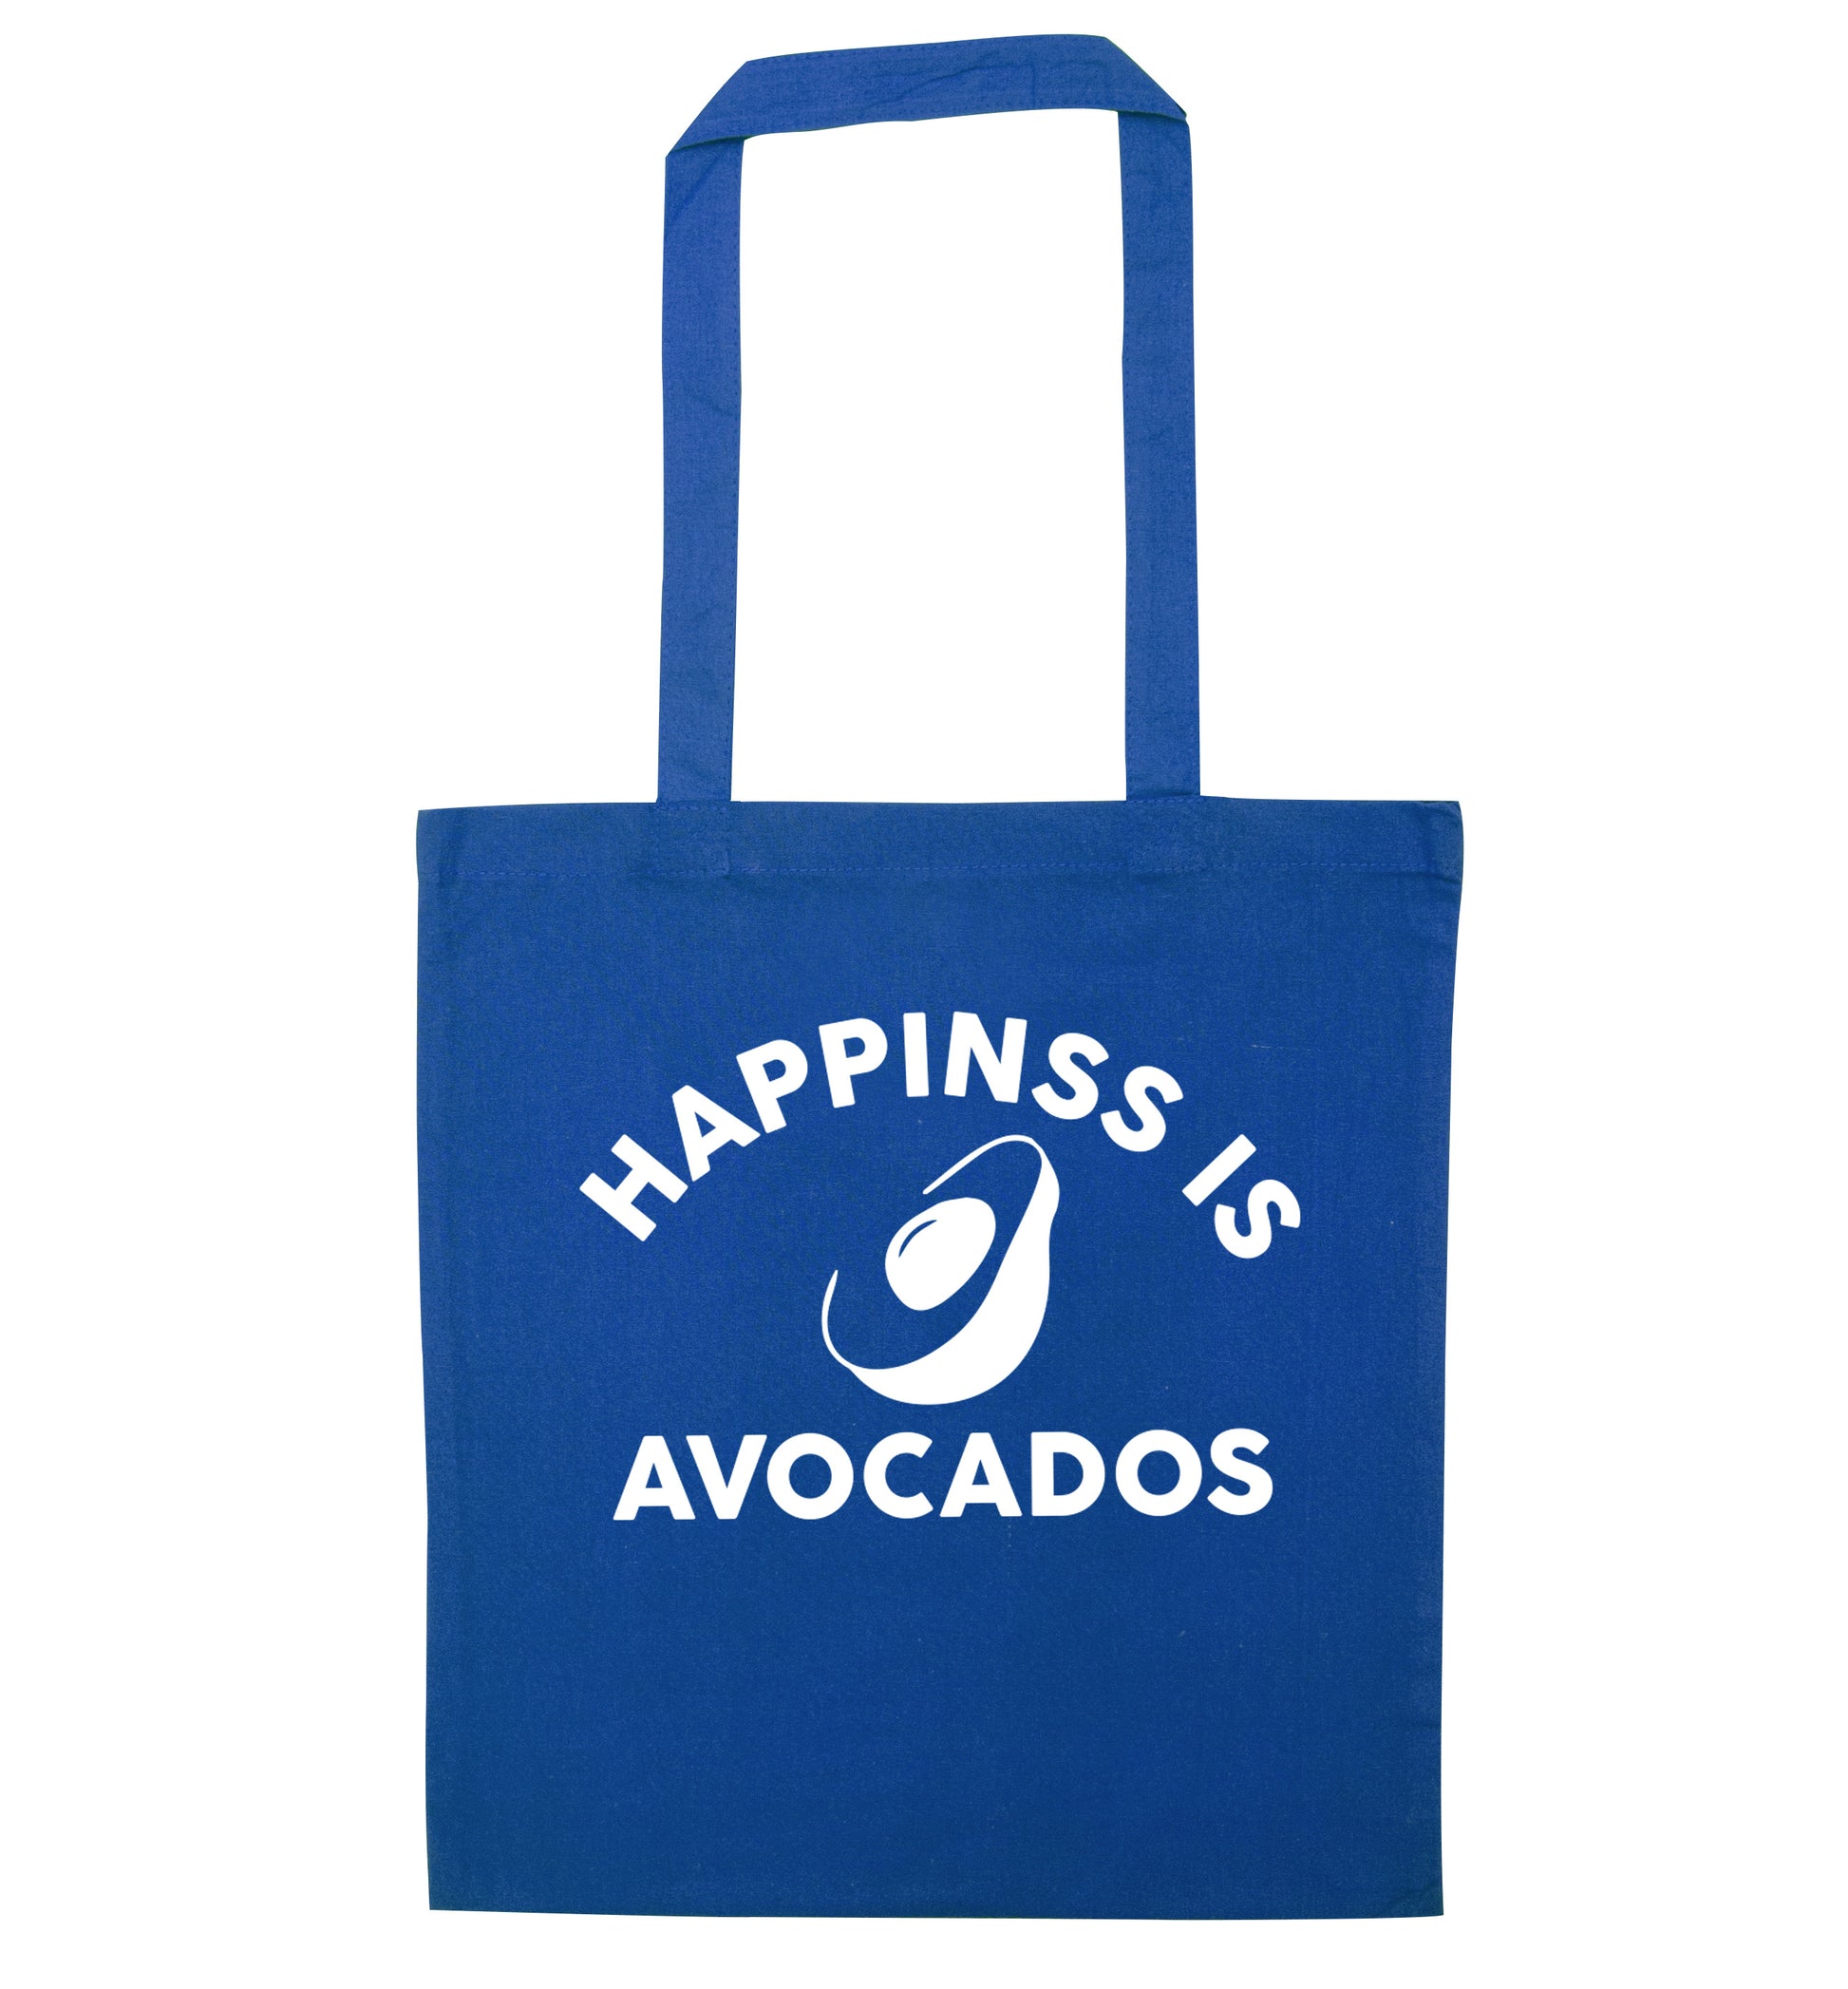 Happiness is avocados blue tote bag